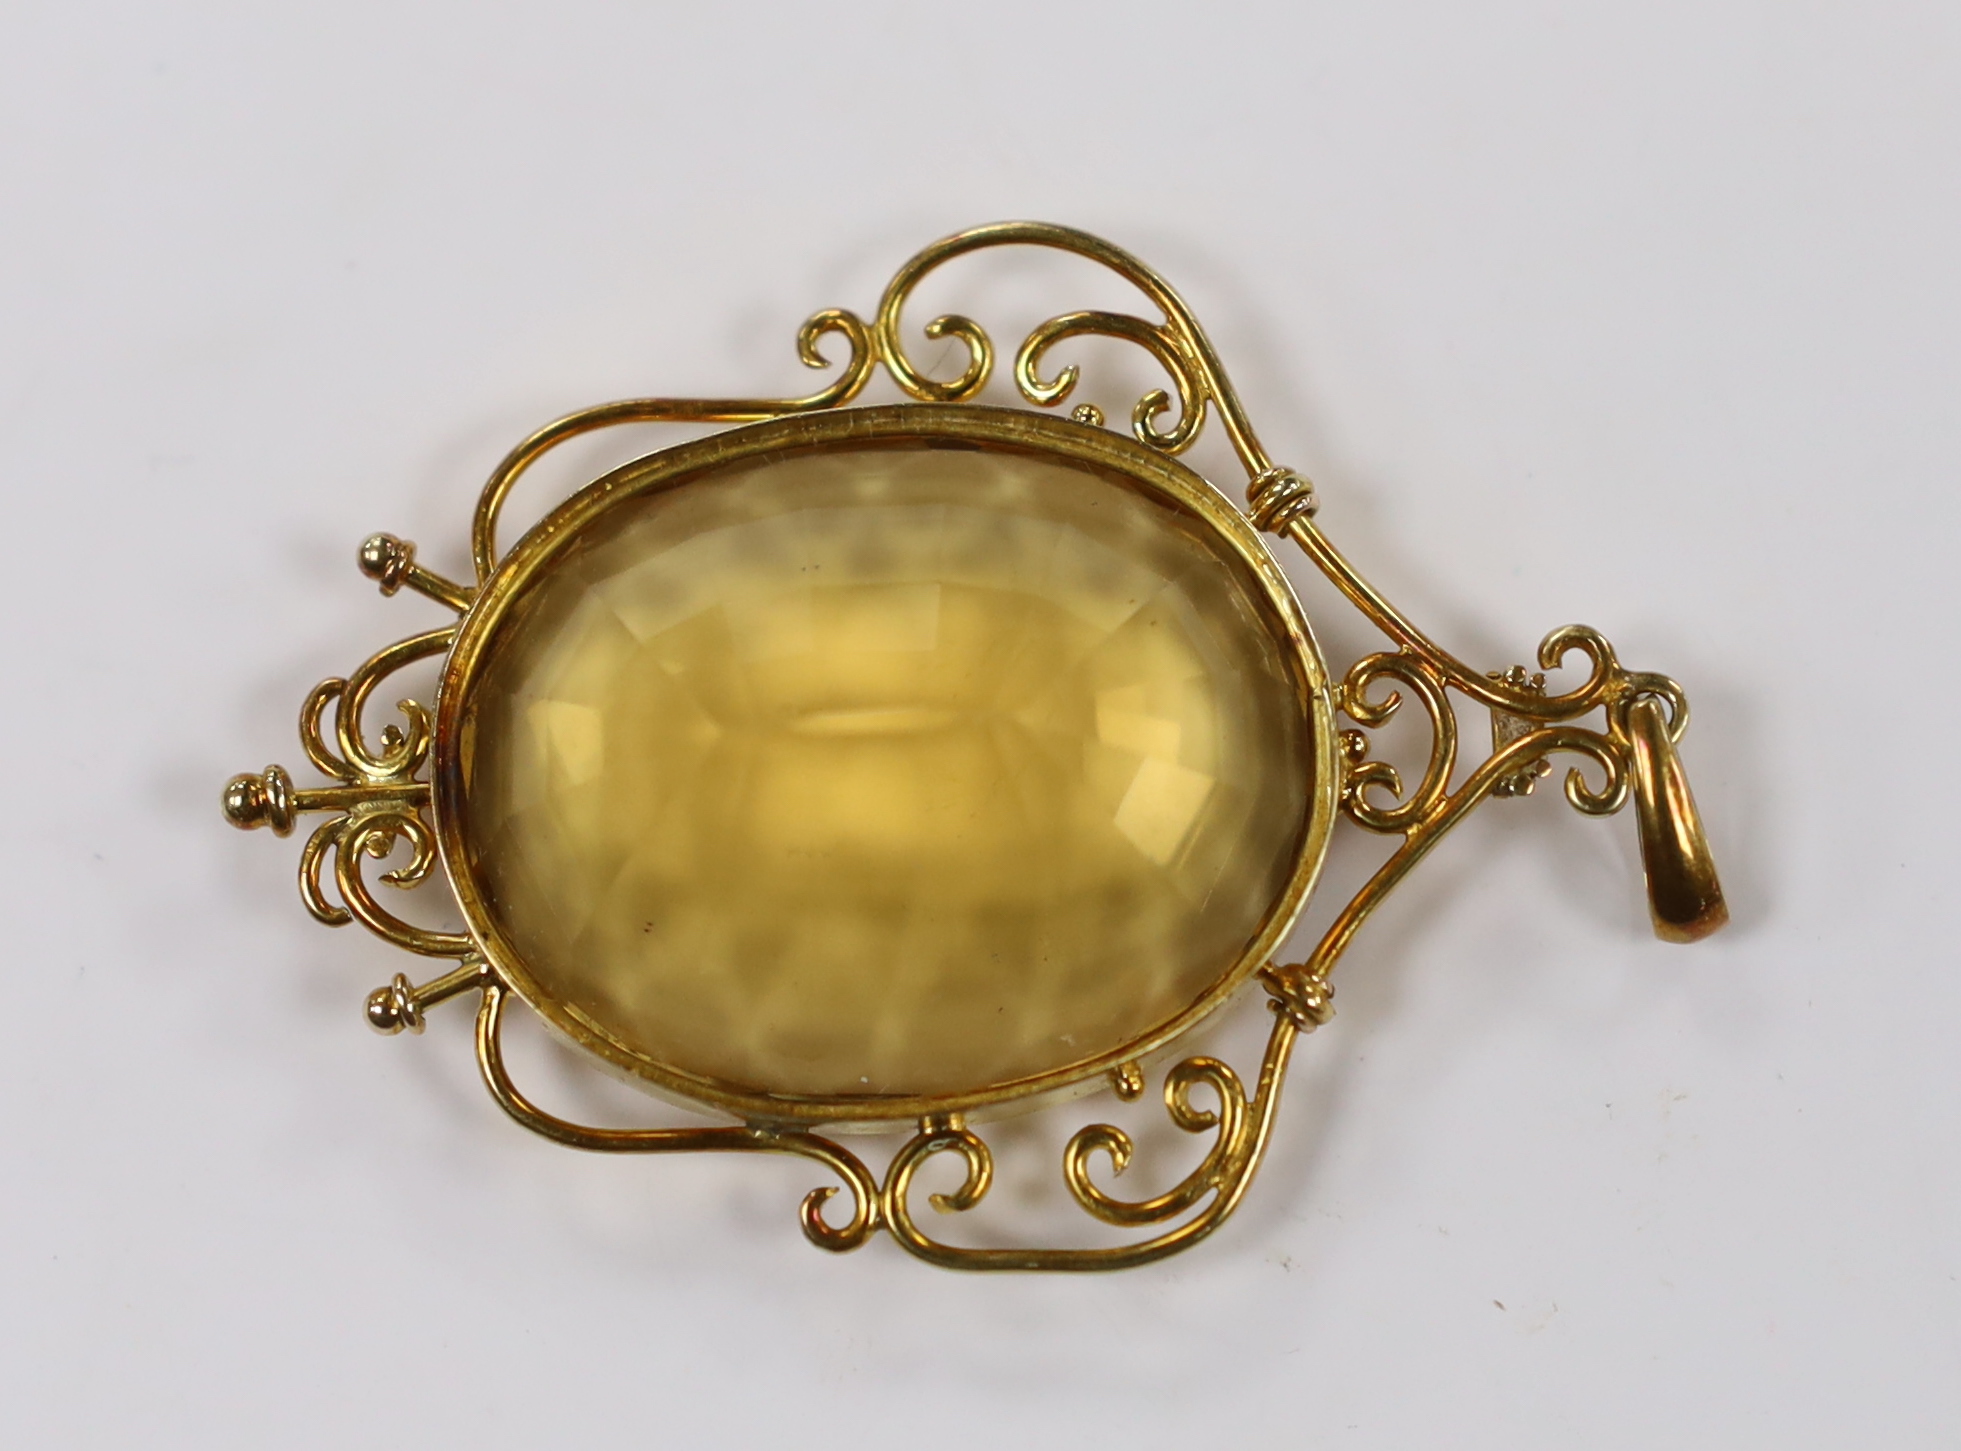 A yellow metal mounted oval cut citrine pendant, overall 56mm, gross weight 15.8 grams.